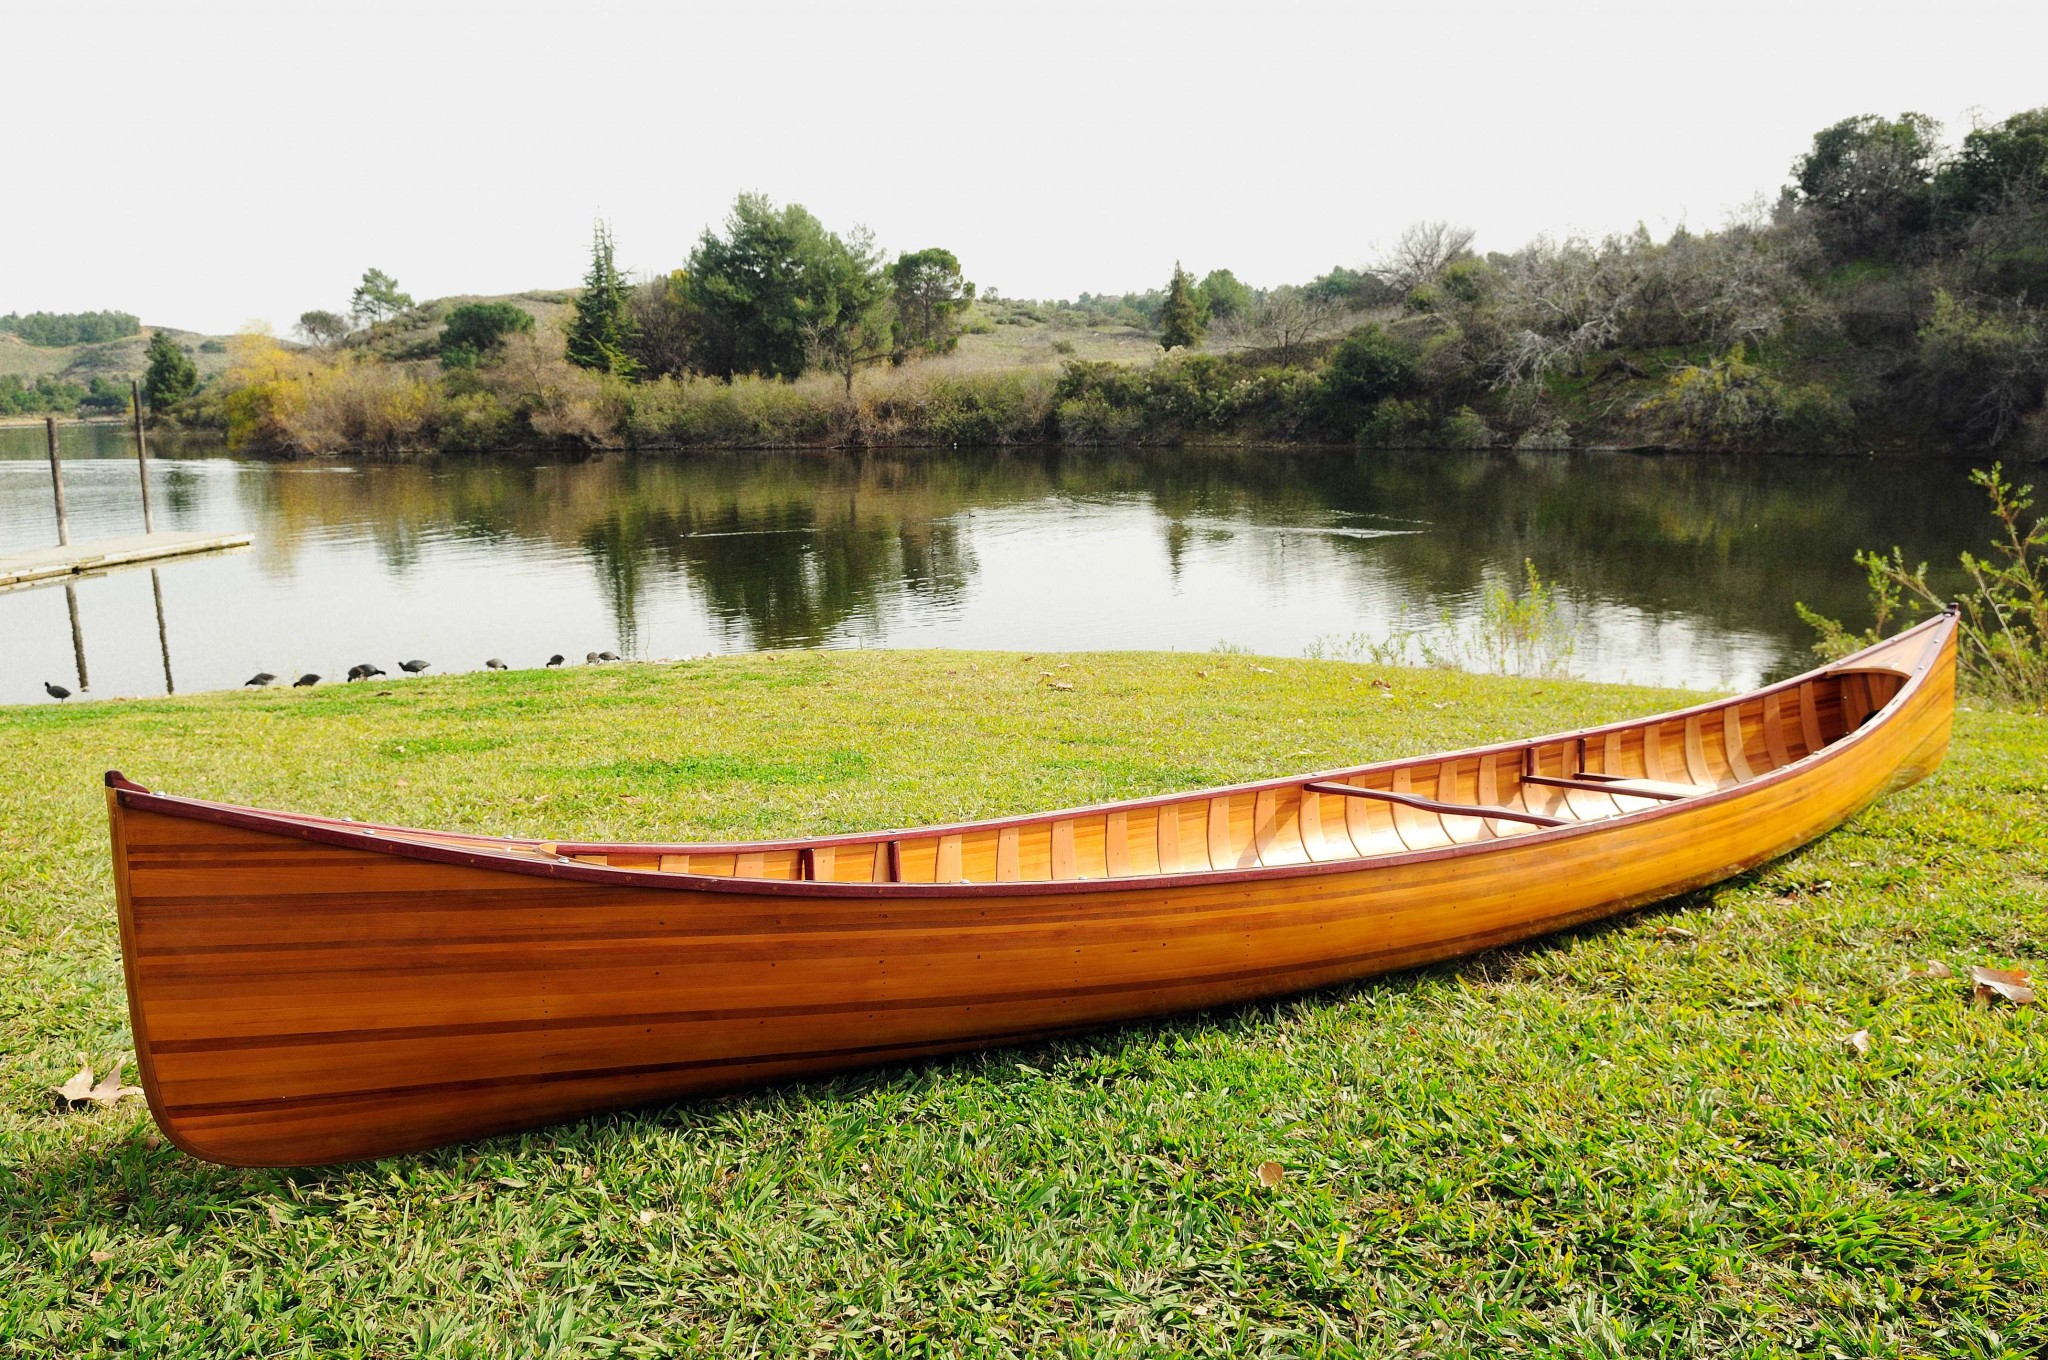 31.5" x 187.5" x 24" Wooden Canoe with Ribs